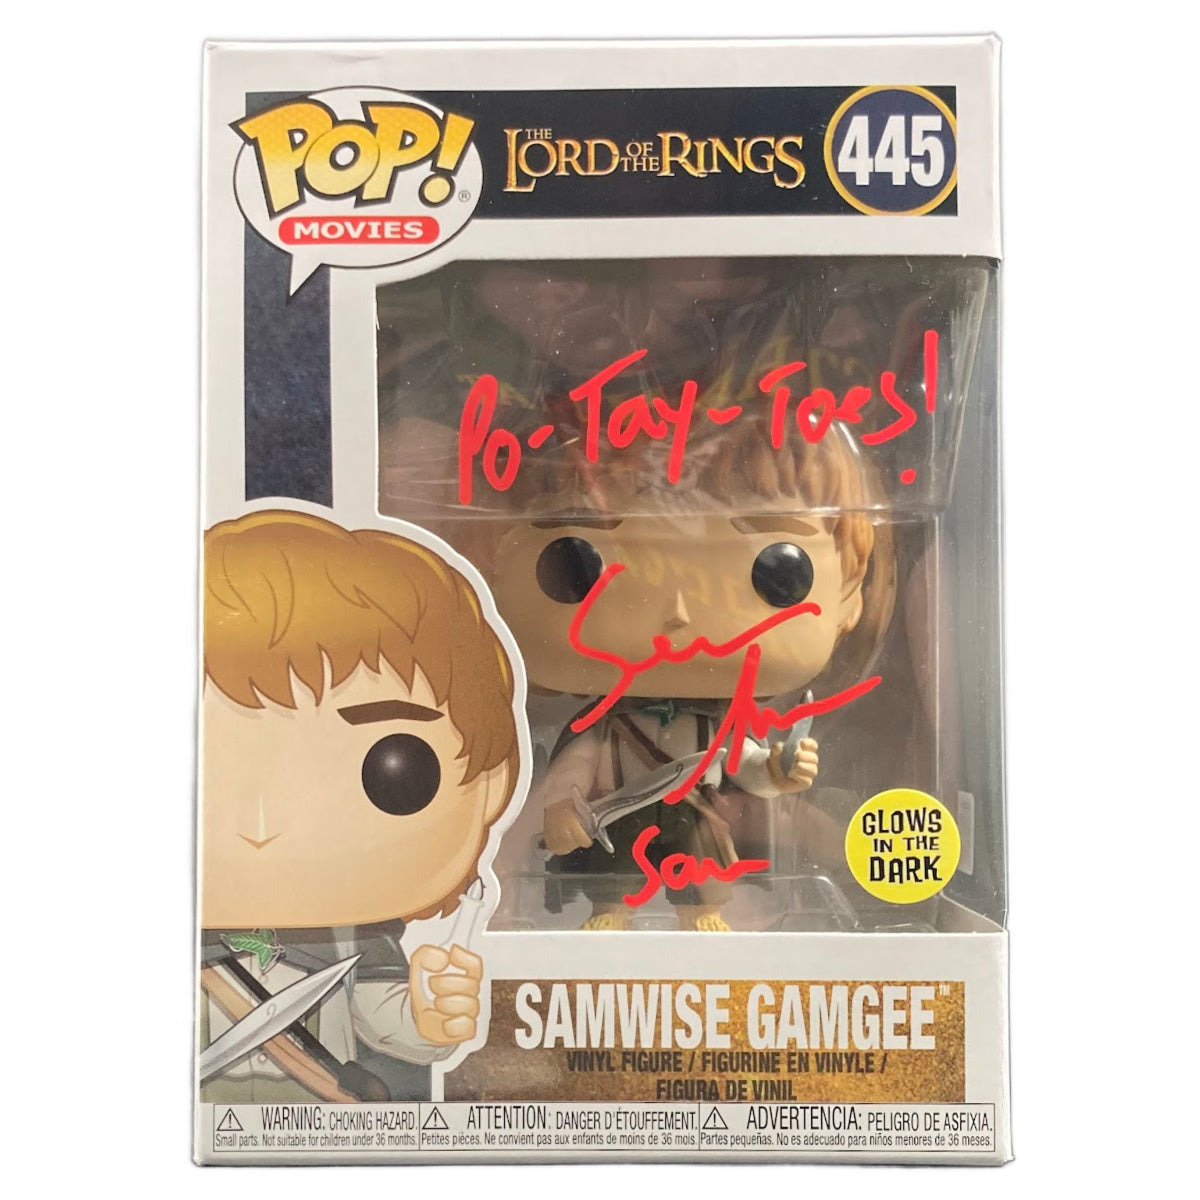 Sean Astin Signed Funko POP The Lord of the Rings Samwise Gamgee Autographed JSA R